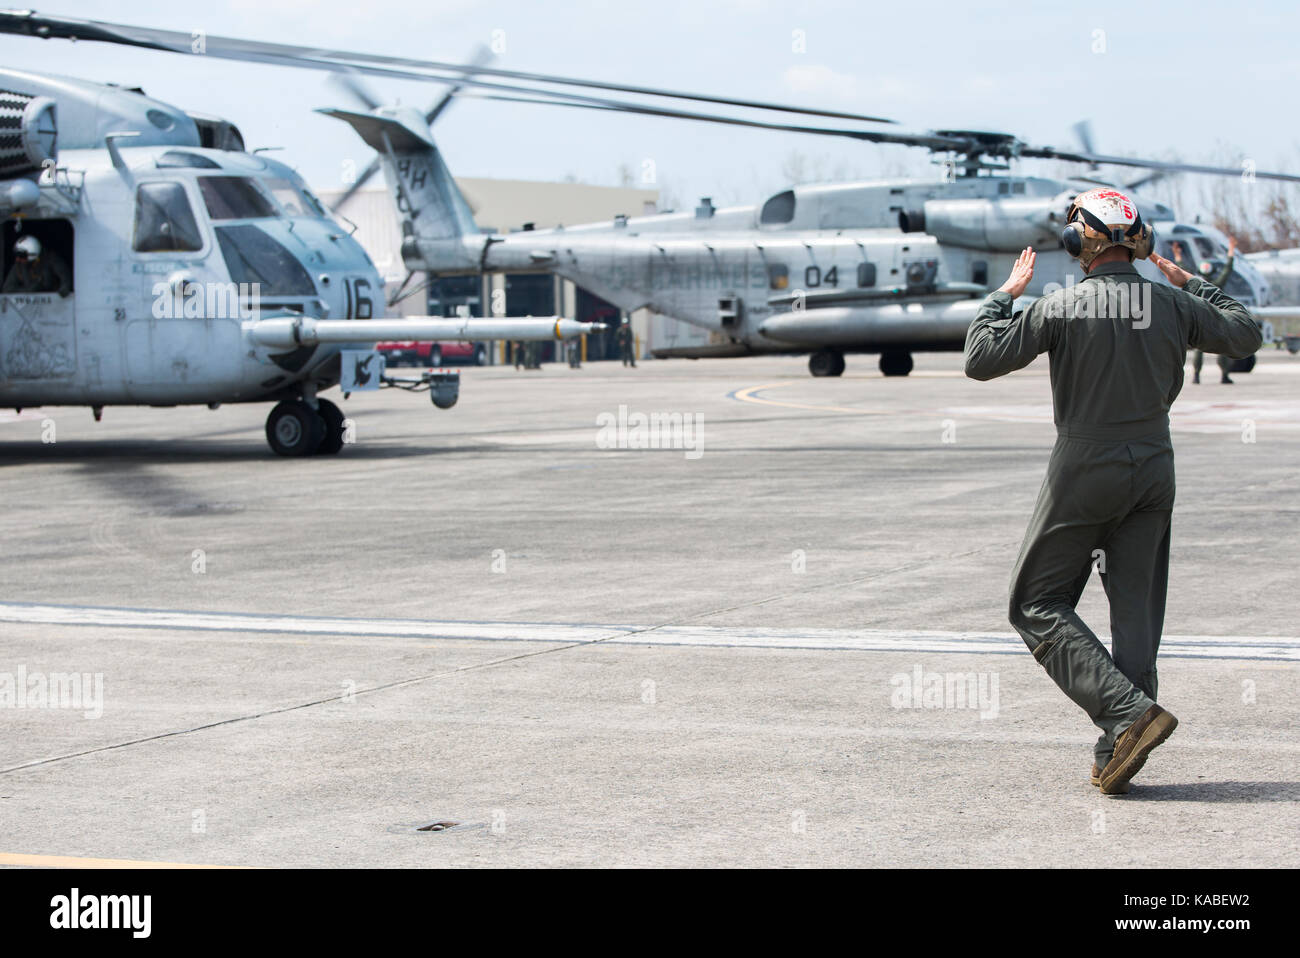 CH-53E Super Stallion helicopters with Joint Task Force Stock Photo